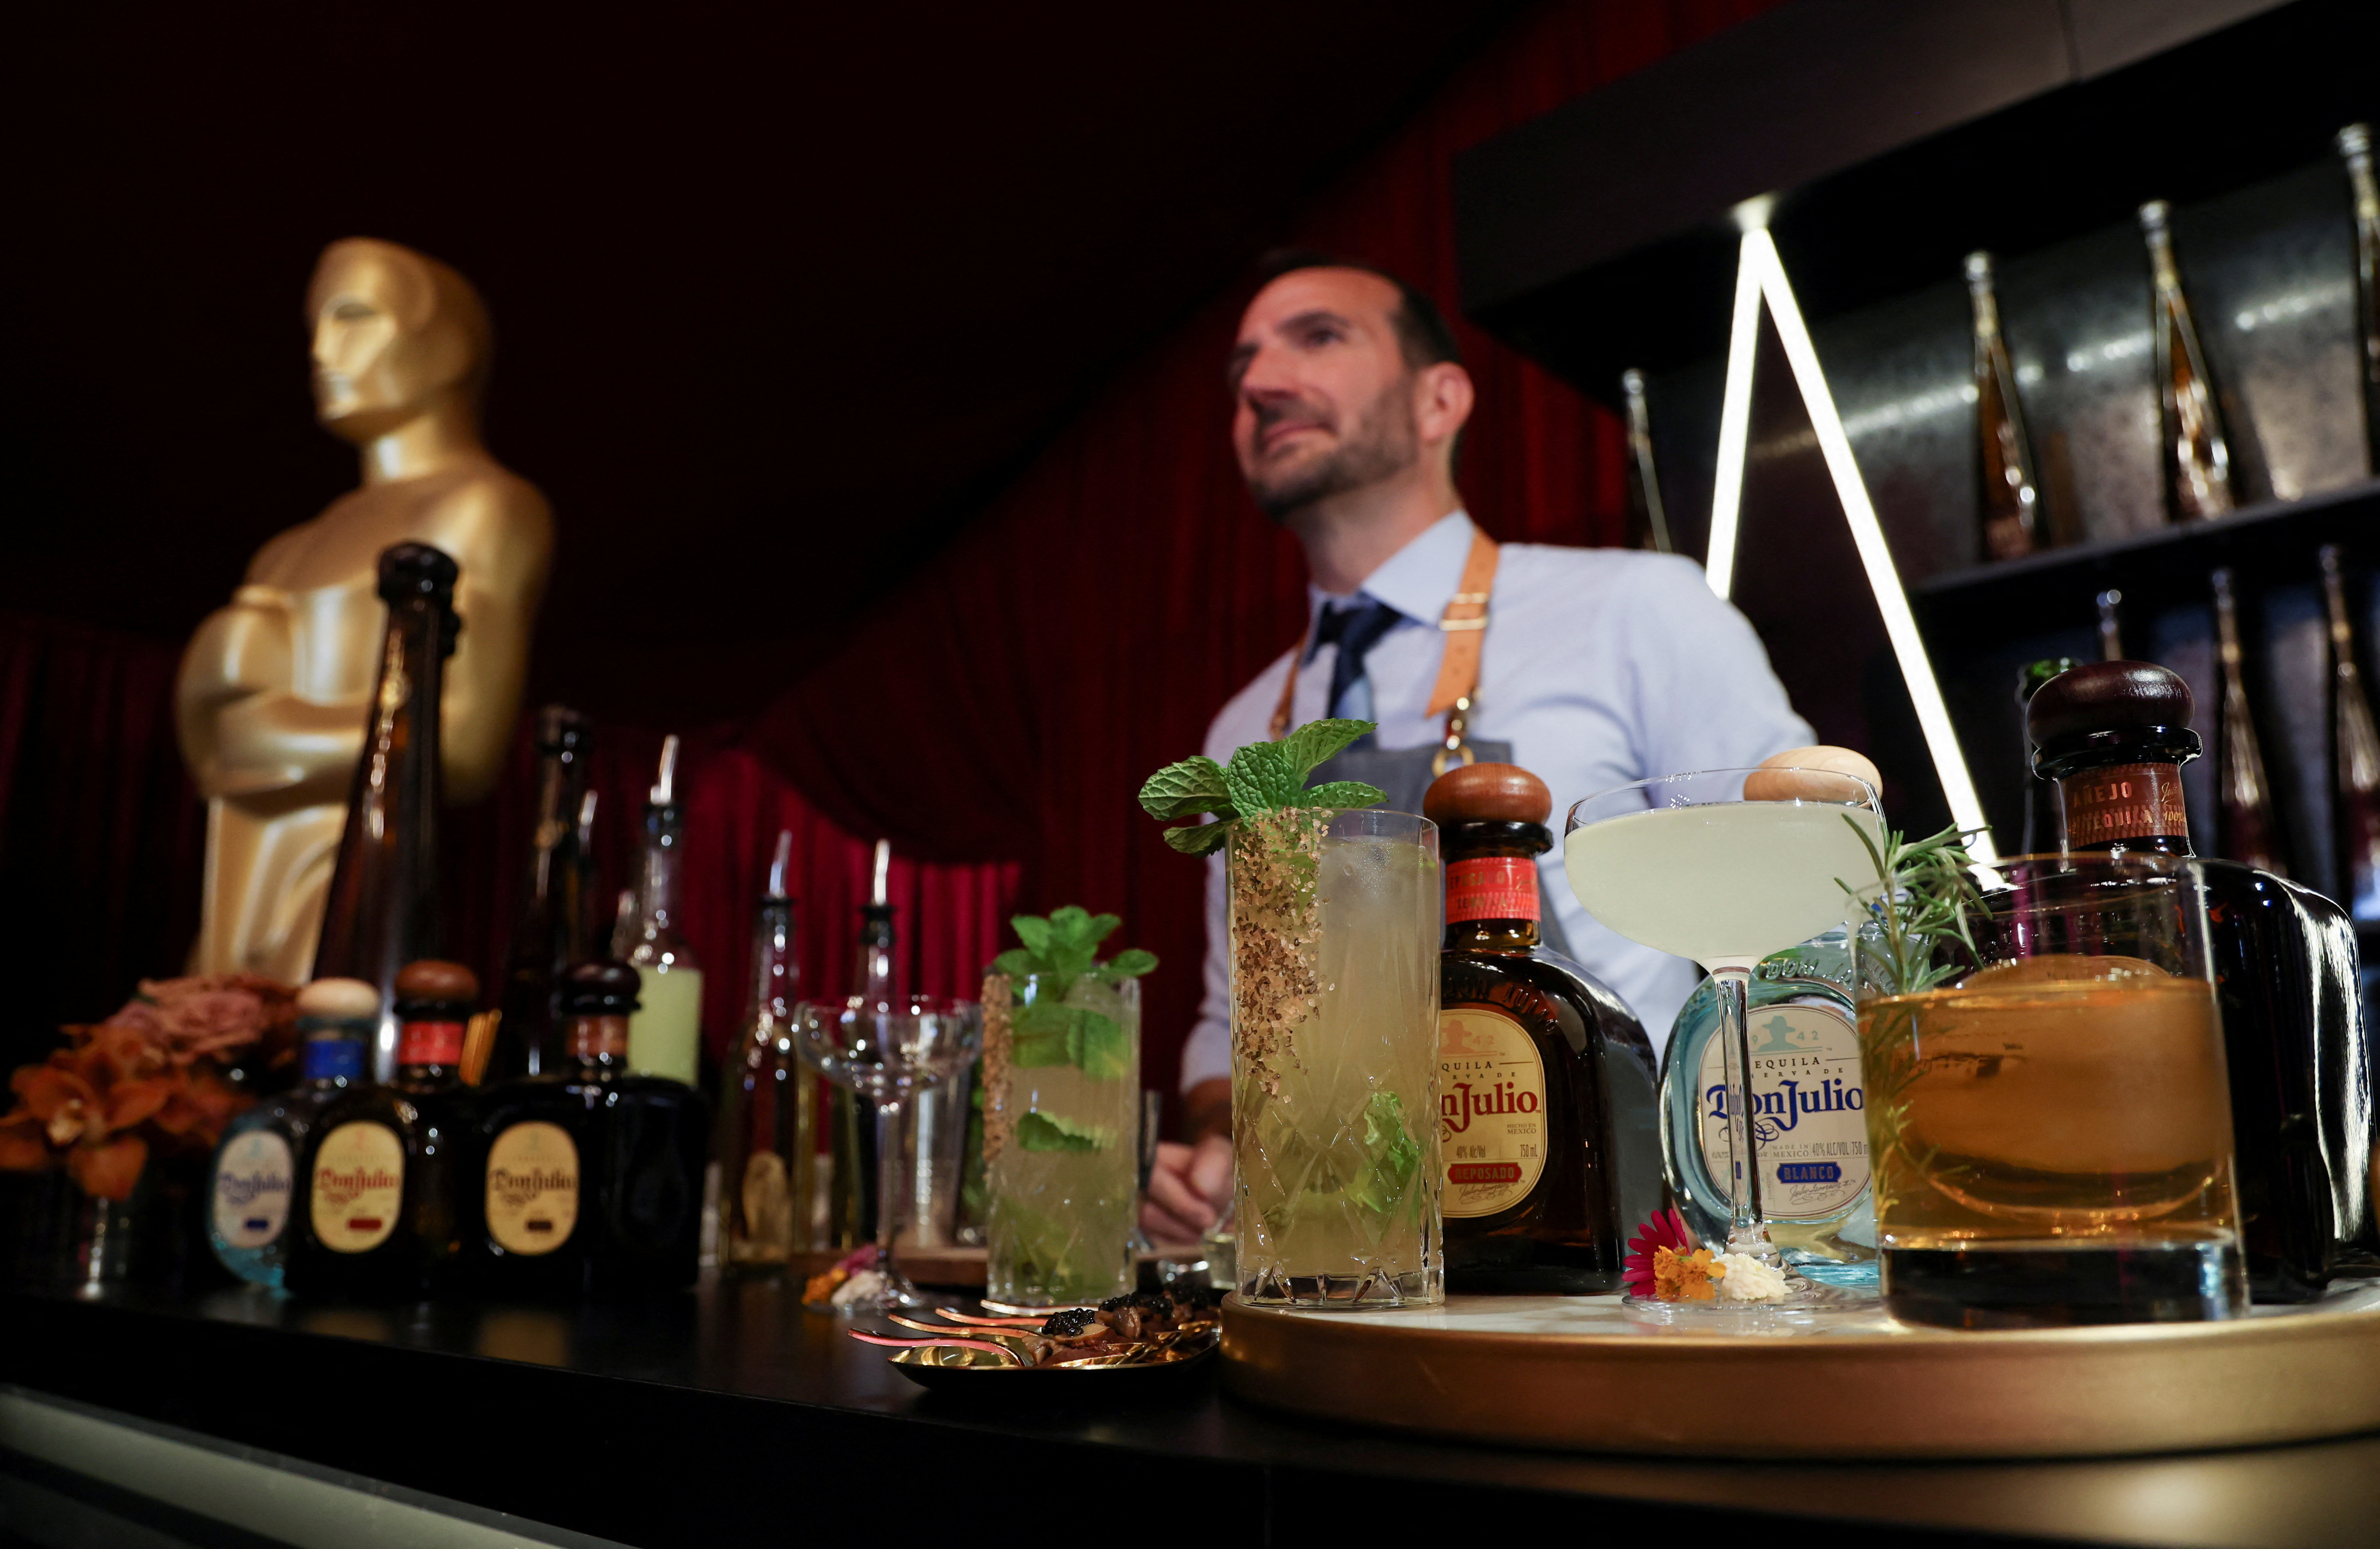 Preview of the food, beverages and decor of this year’s Governors Ball, the Academy’s official post-Oscars celebration, in Los Angeles